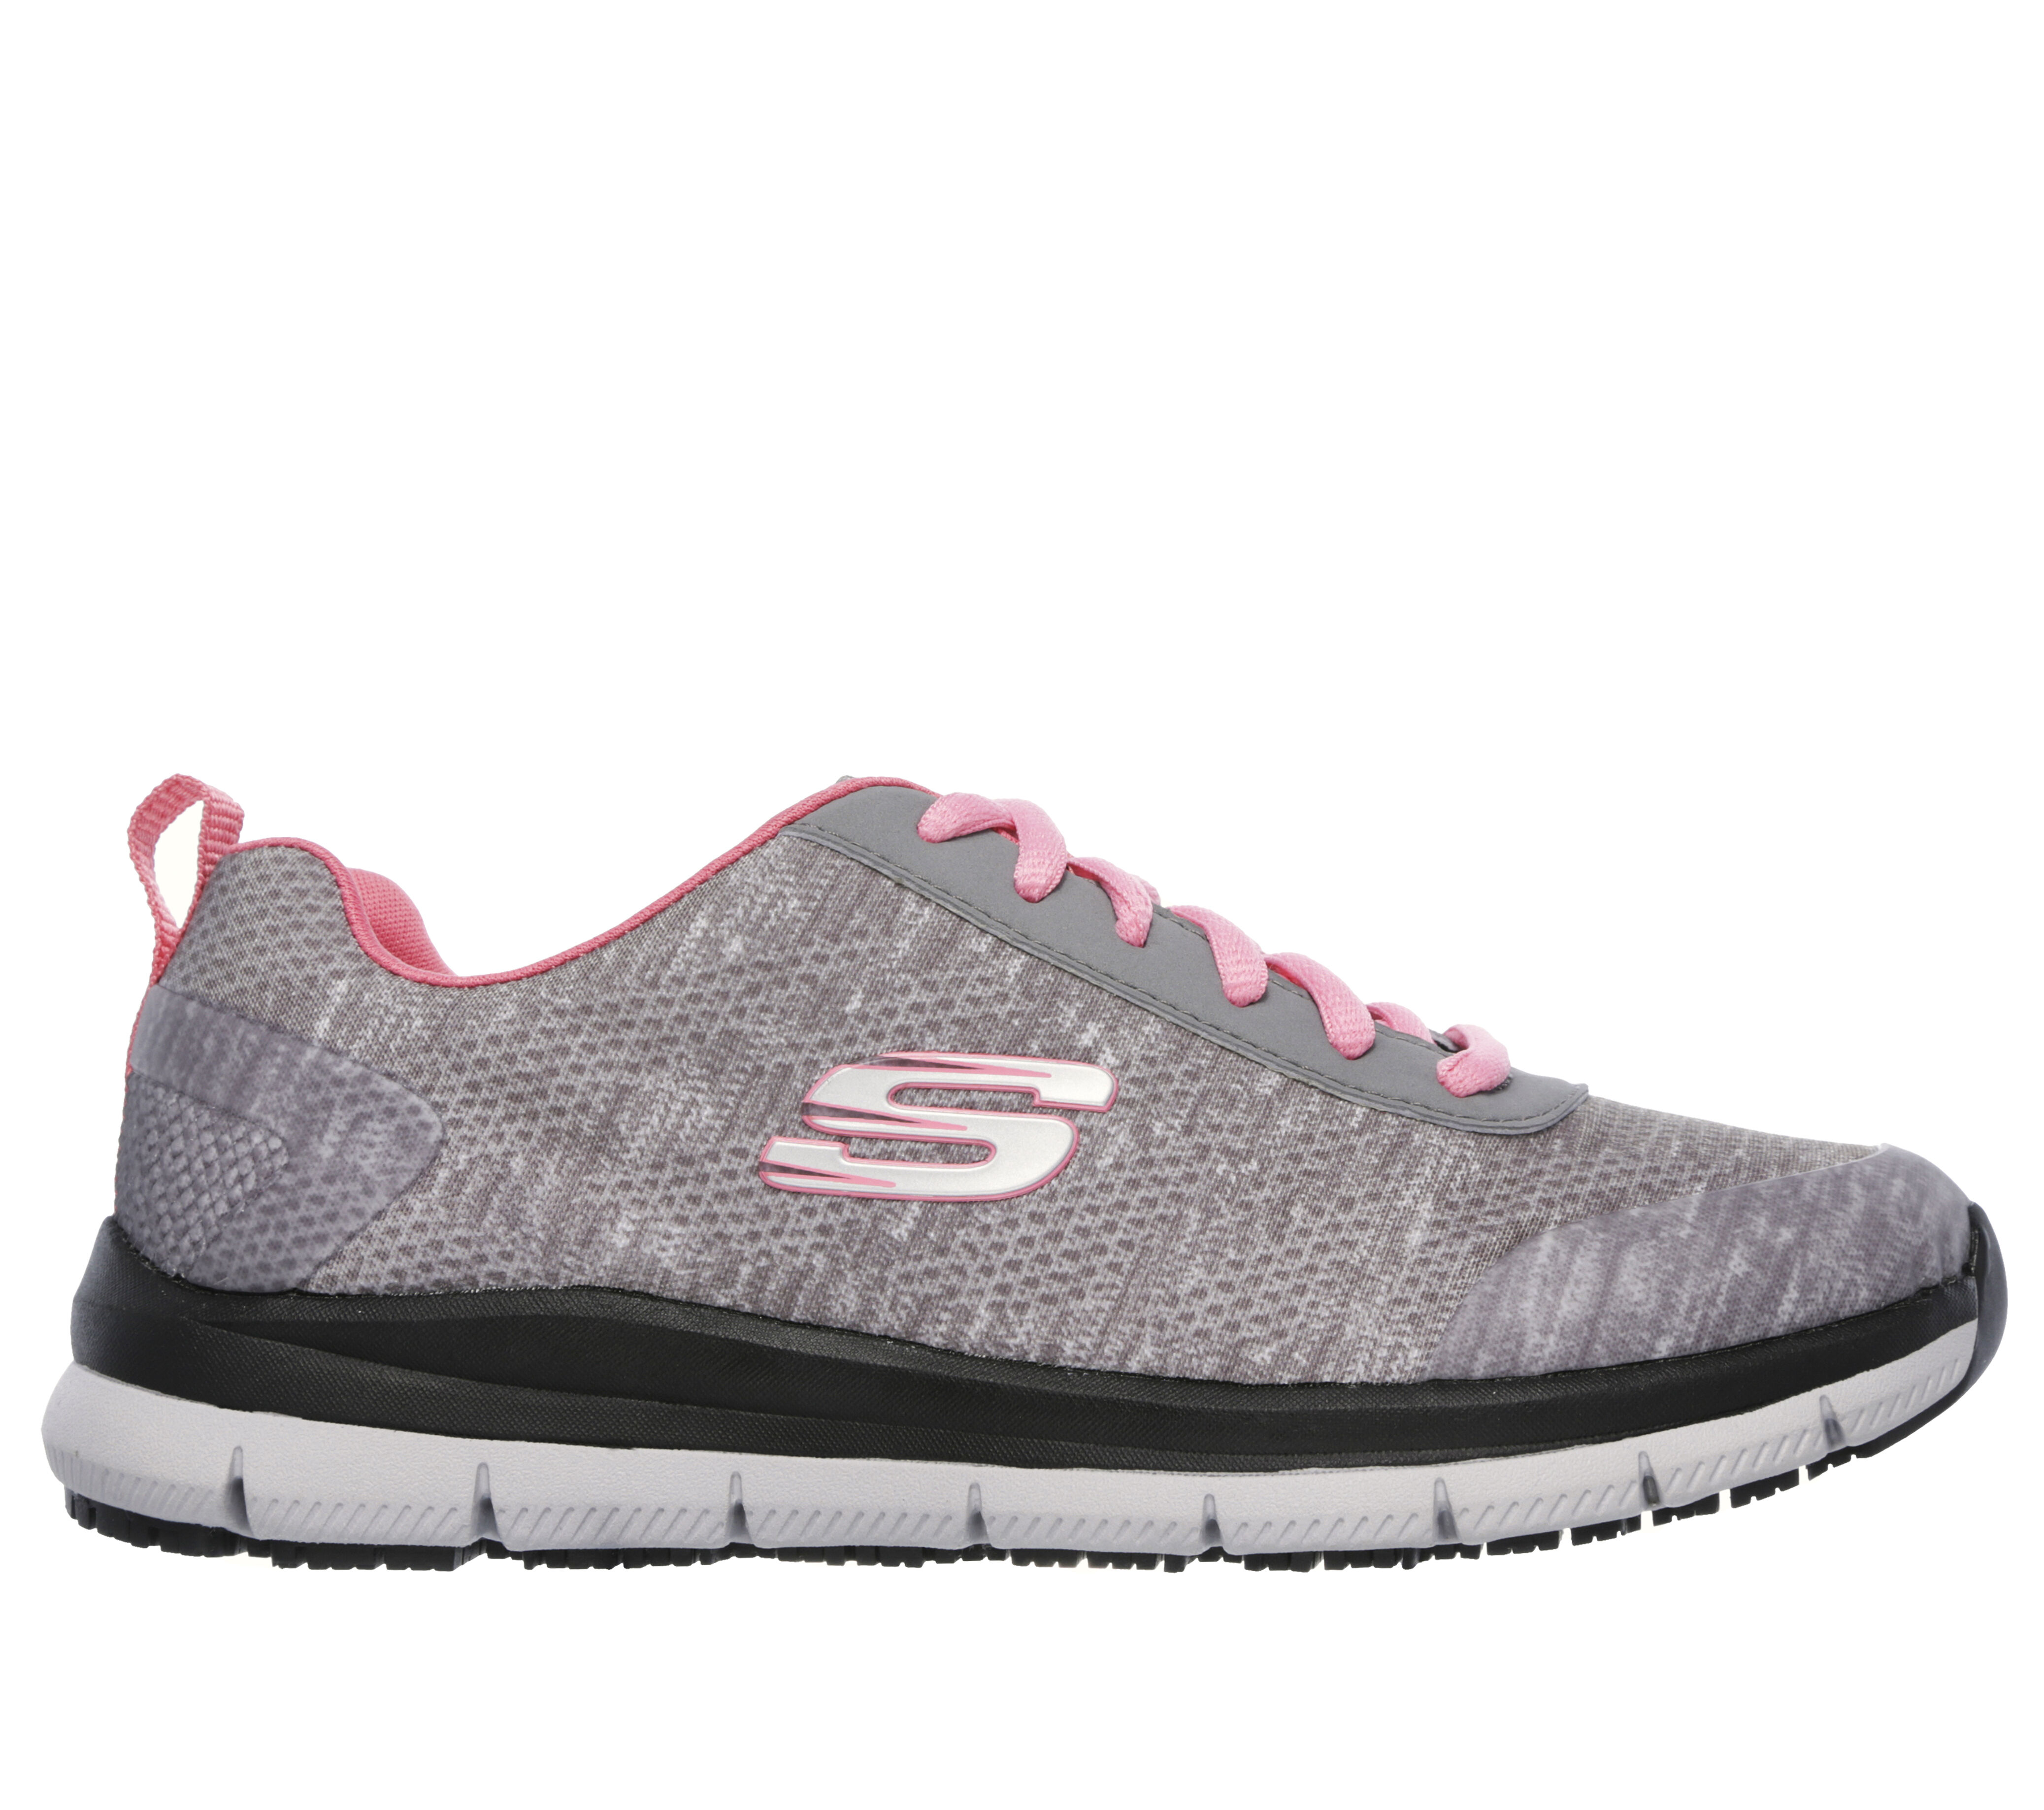 skechers safety shoes ladies